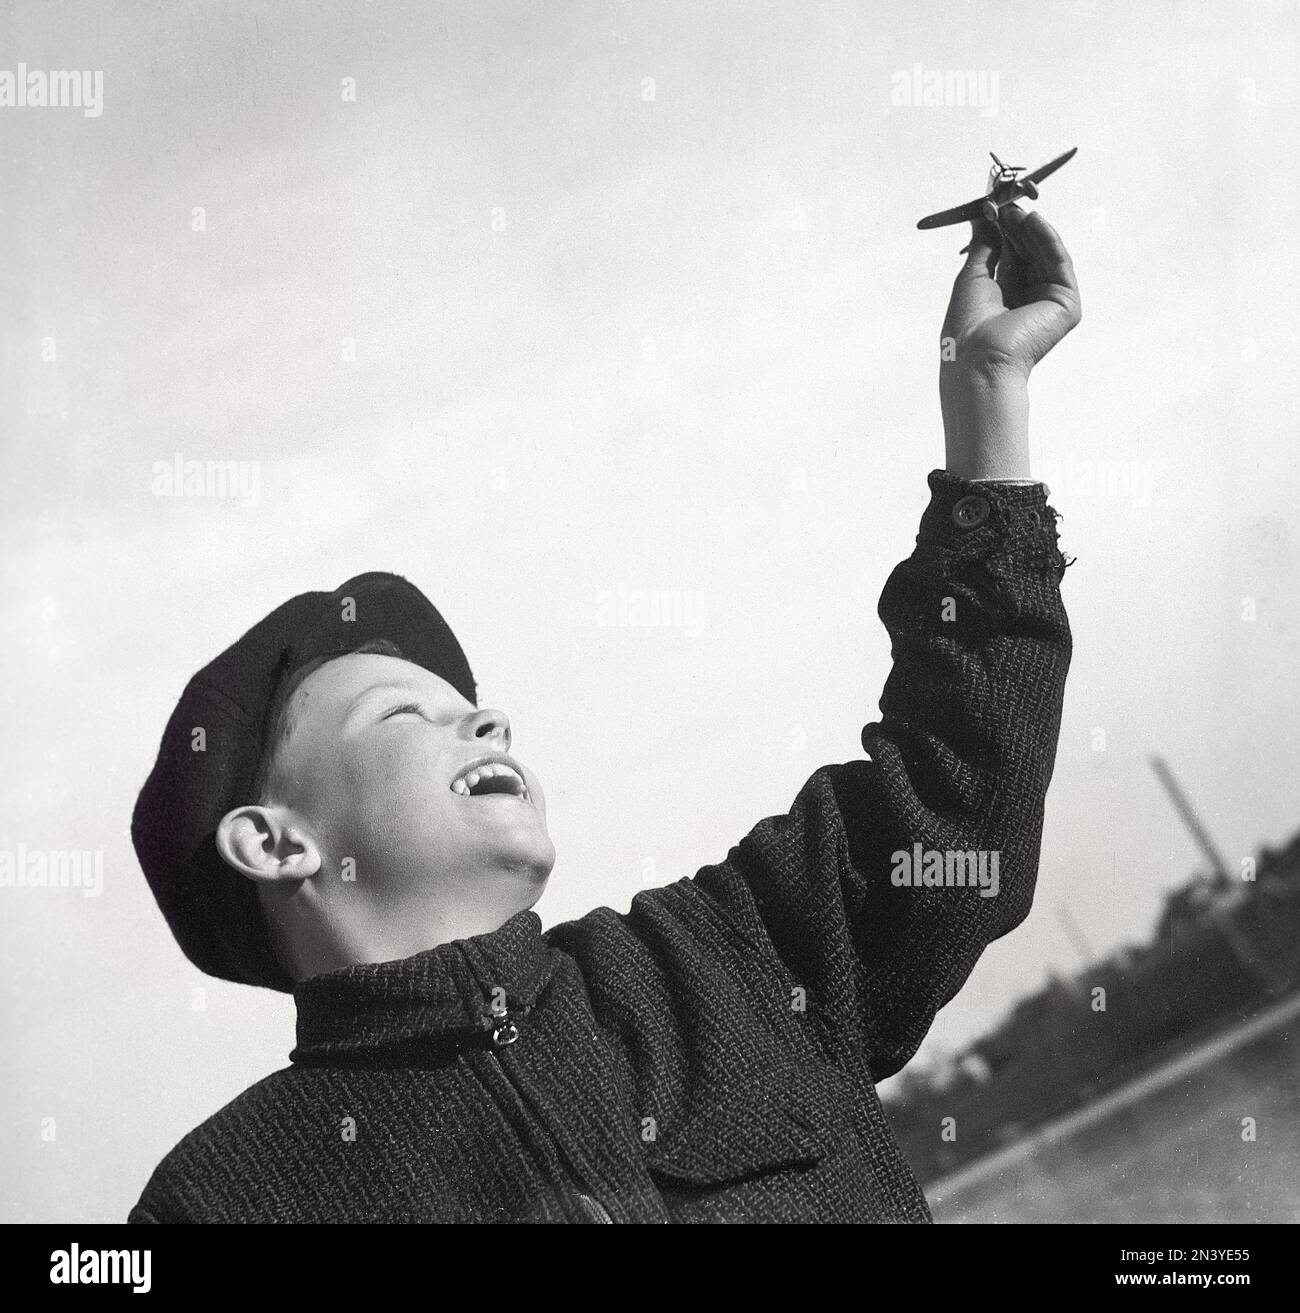 Boy in the 1940s. A boy is seen holding a toy ariplane in his hand, made by the german manufacturer Wiking Modellbau in Berling who was famous for making models, a production that started 193 in the scale 1:200 in metal. Sweden 22 april 1940 Kristoffersson ref 117-11 Stock Photo